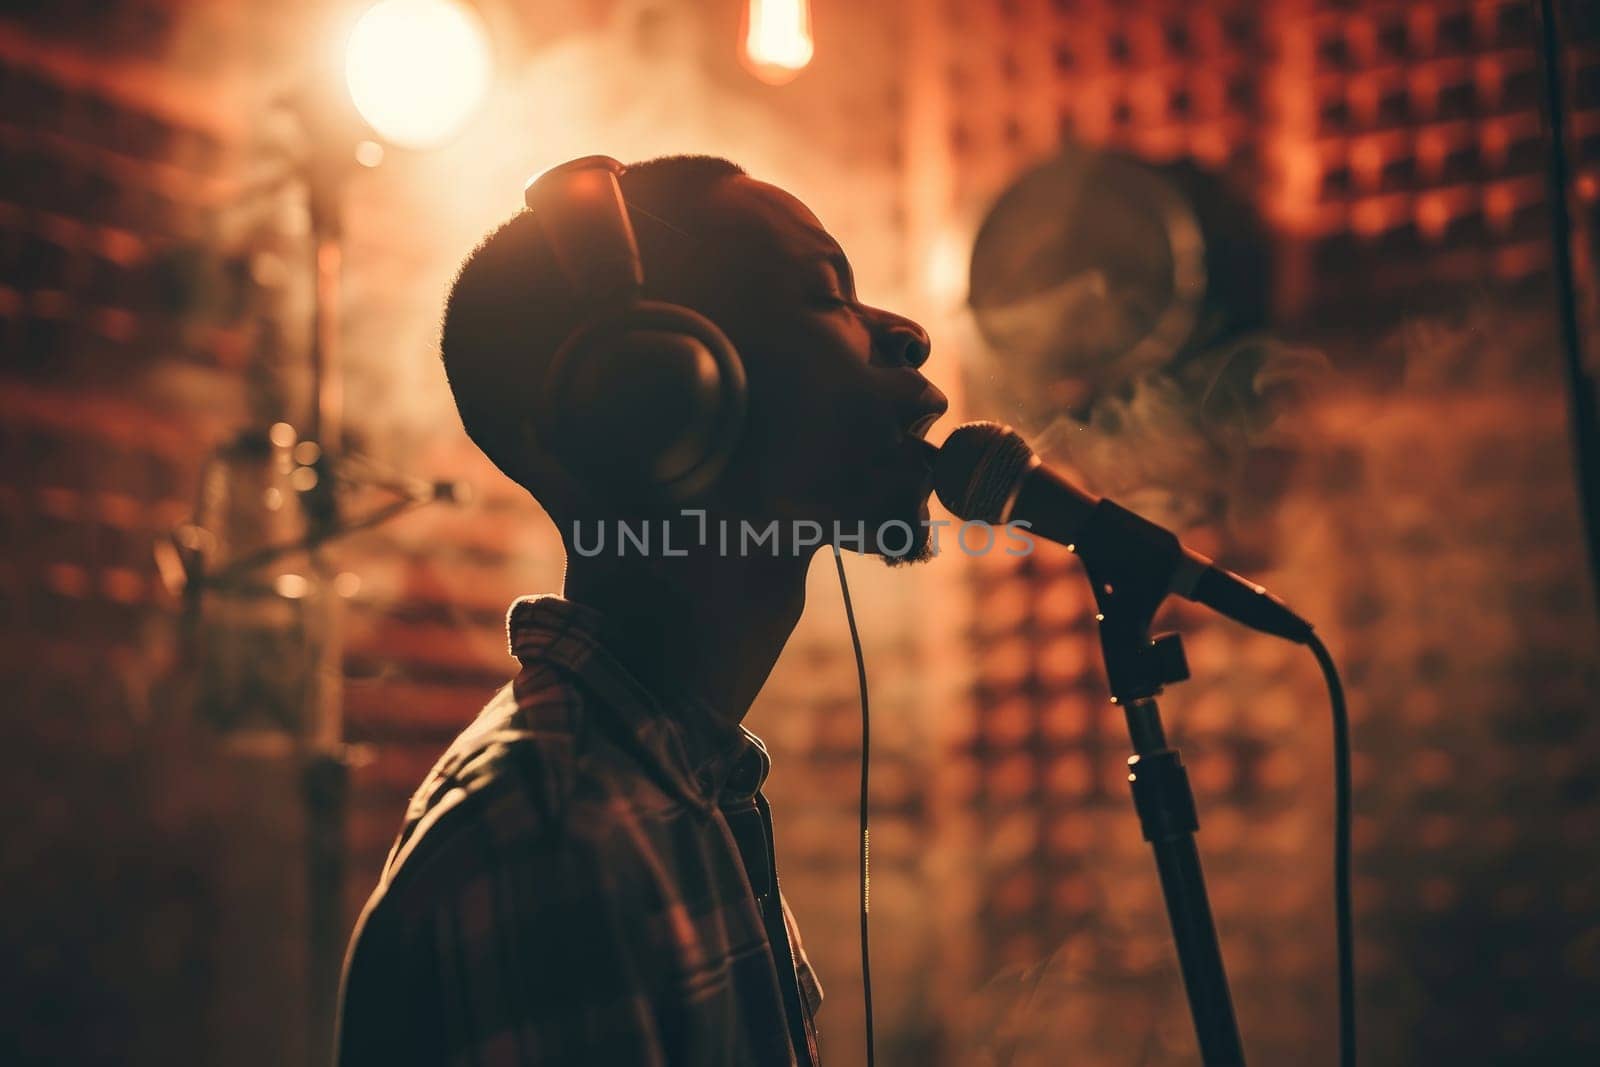 A singer wearing headphones belts out a powerful note in a soundproof vocal booth. by Chawagen